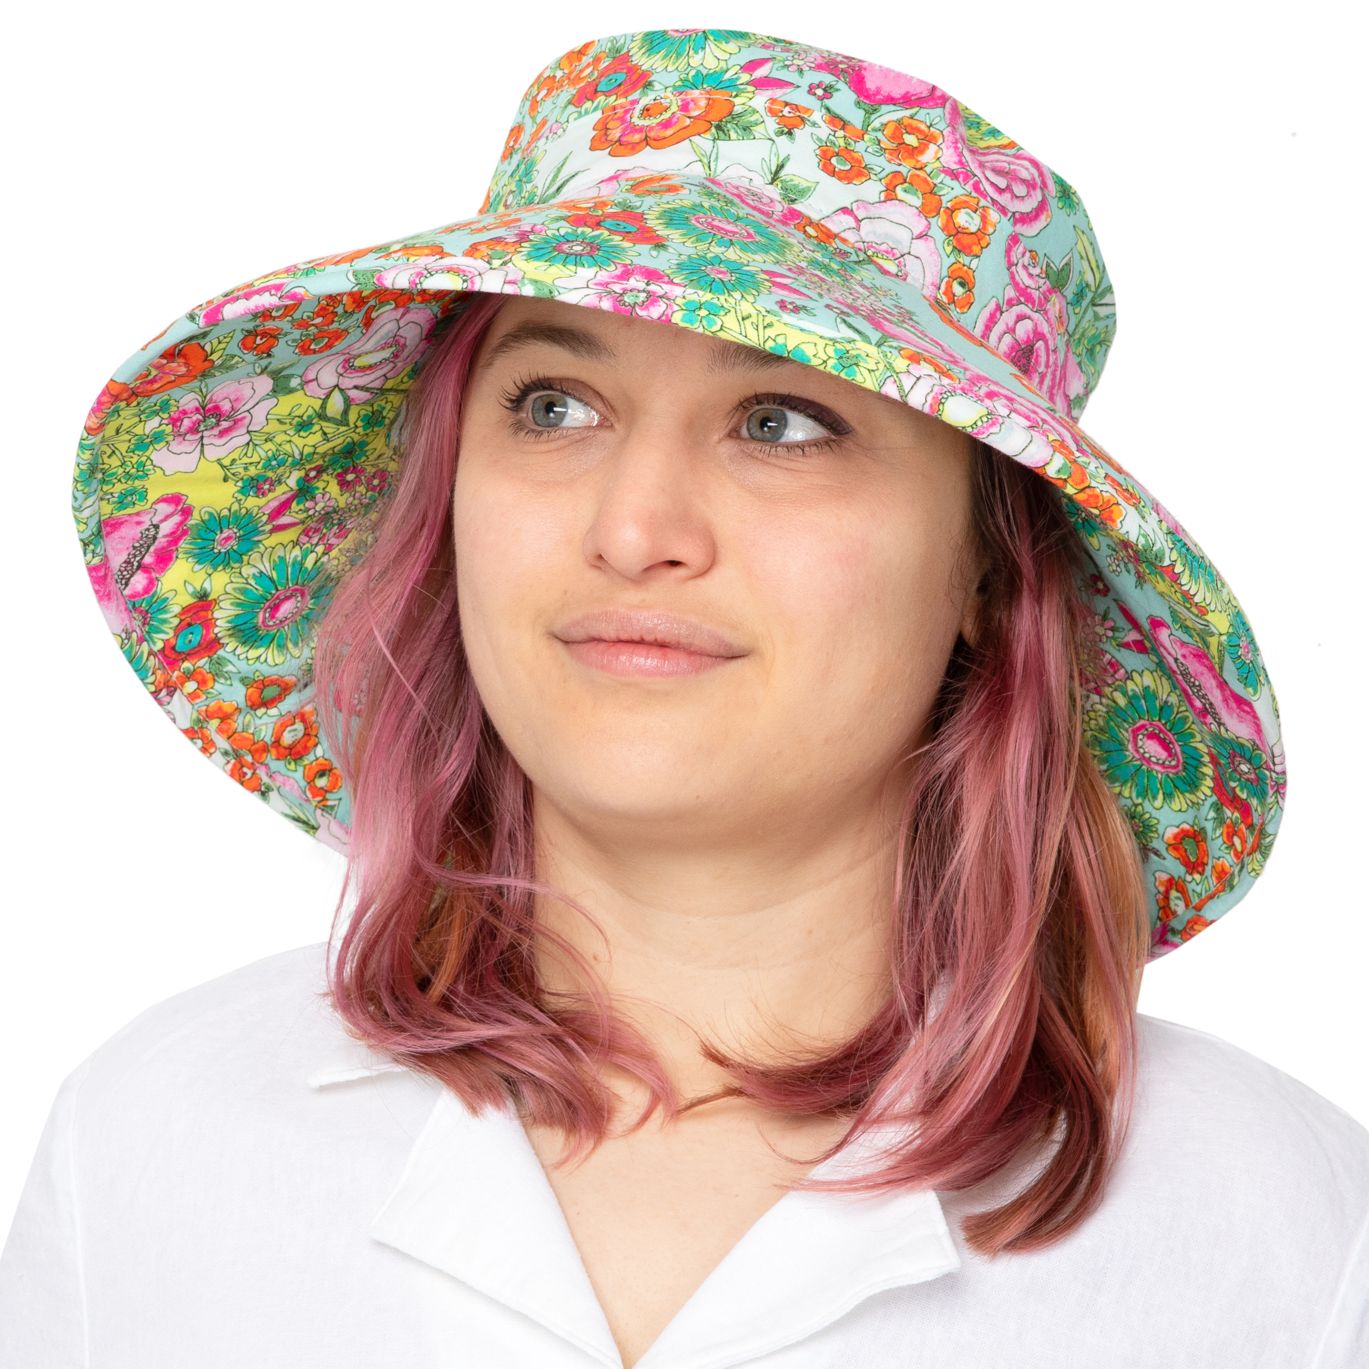 Wide Brim Sun Hat in Vibrant Cutting Garden Cotton Print-Made in Canada by Puffin Gear-UPF50 Sun Protection